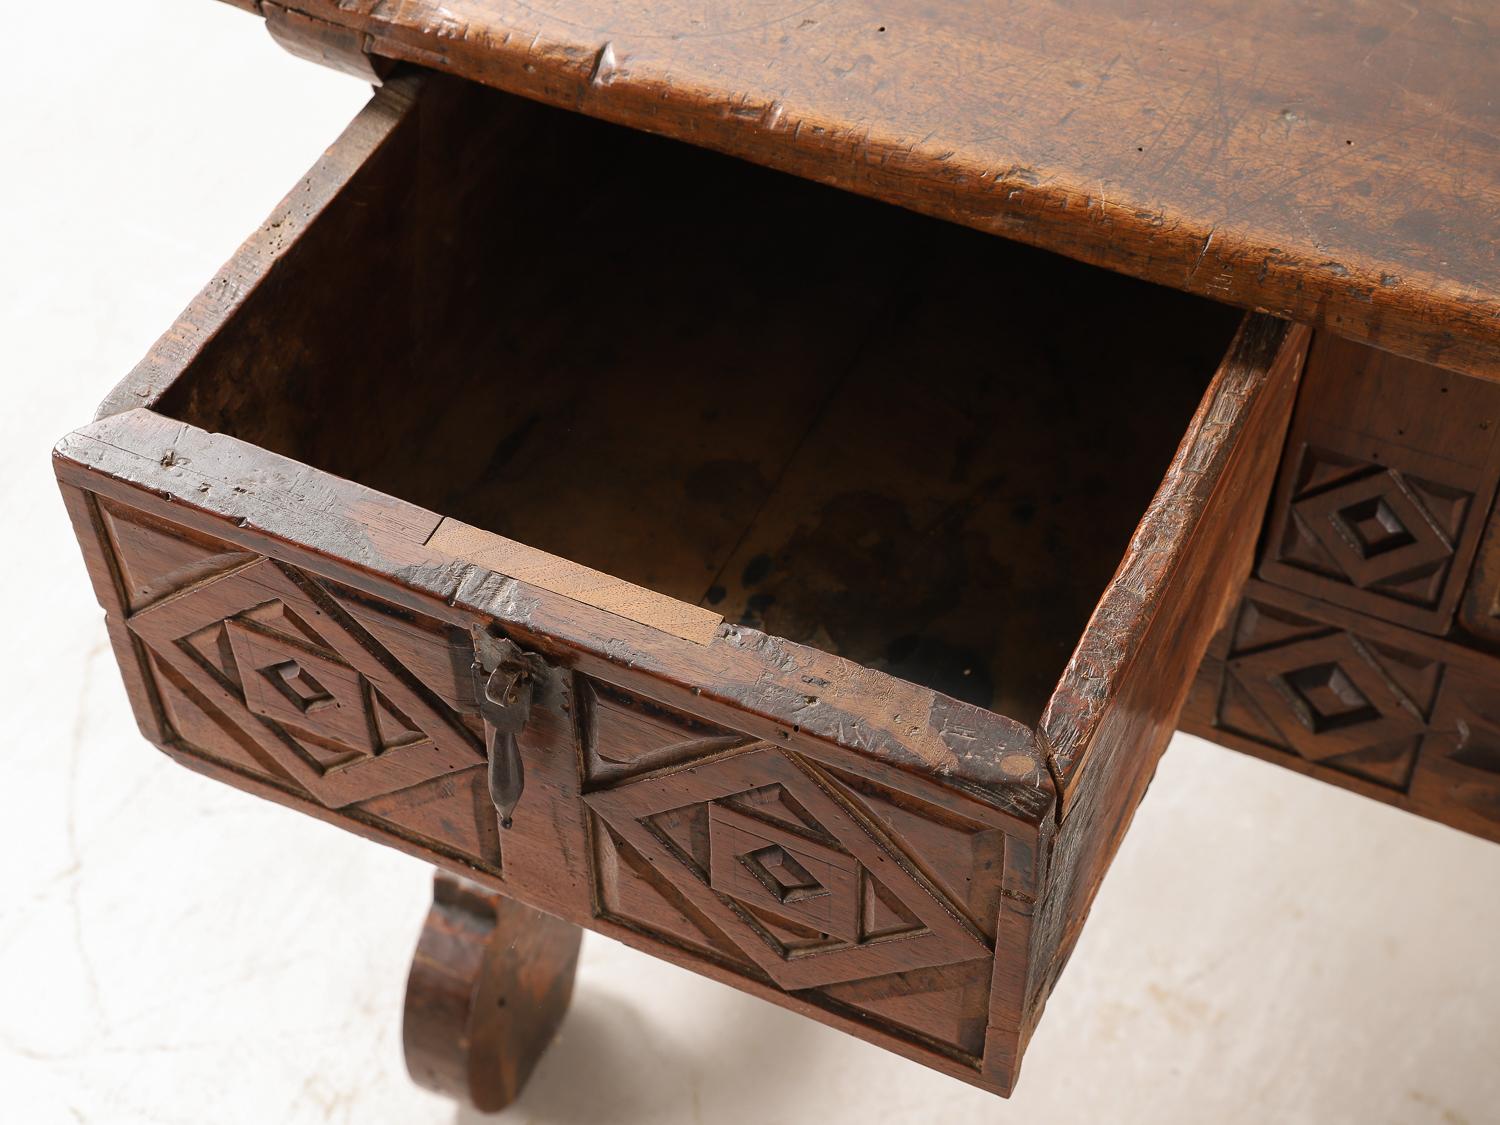 Spanish 18th Century Carved Walnut Table with Original Iron Pulls and Lyre Legs For Sale 14